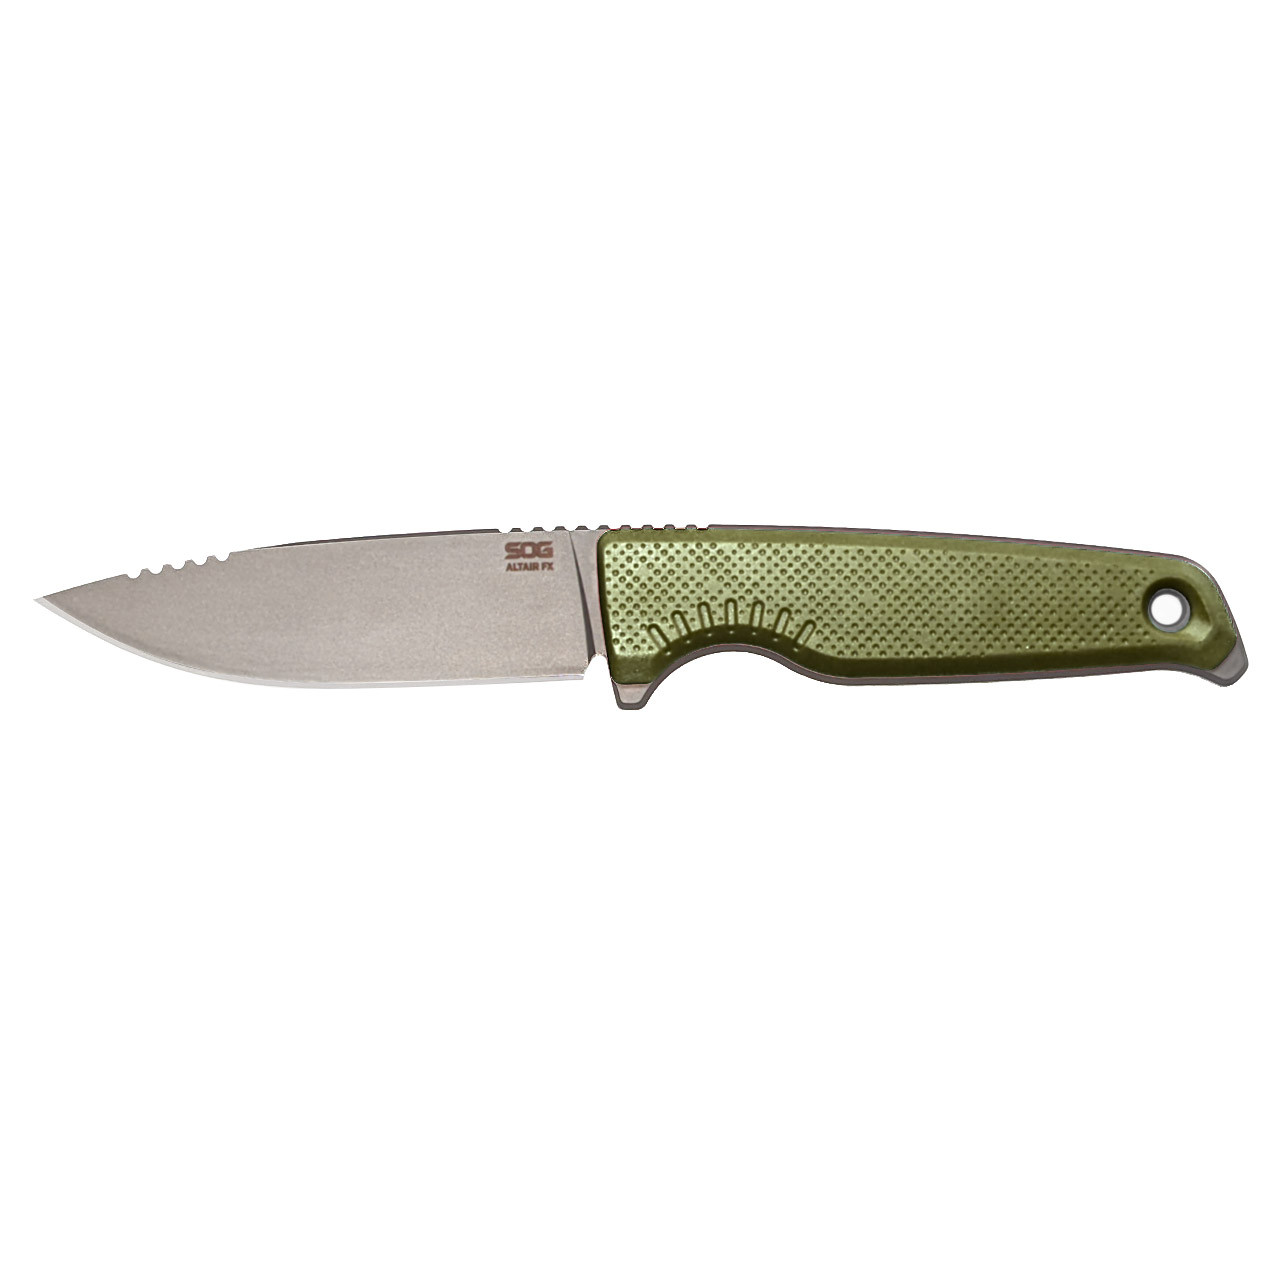 SOG Knives Altair FX 17-79-03-47 Fixed Blade CPM 154 Stainless Field Green Knife